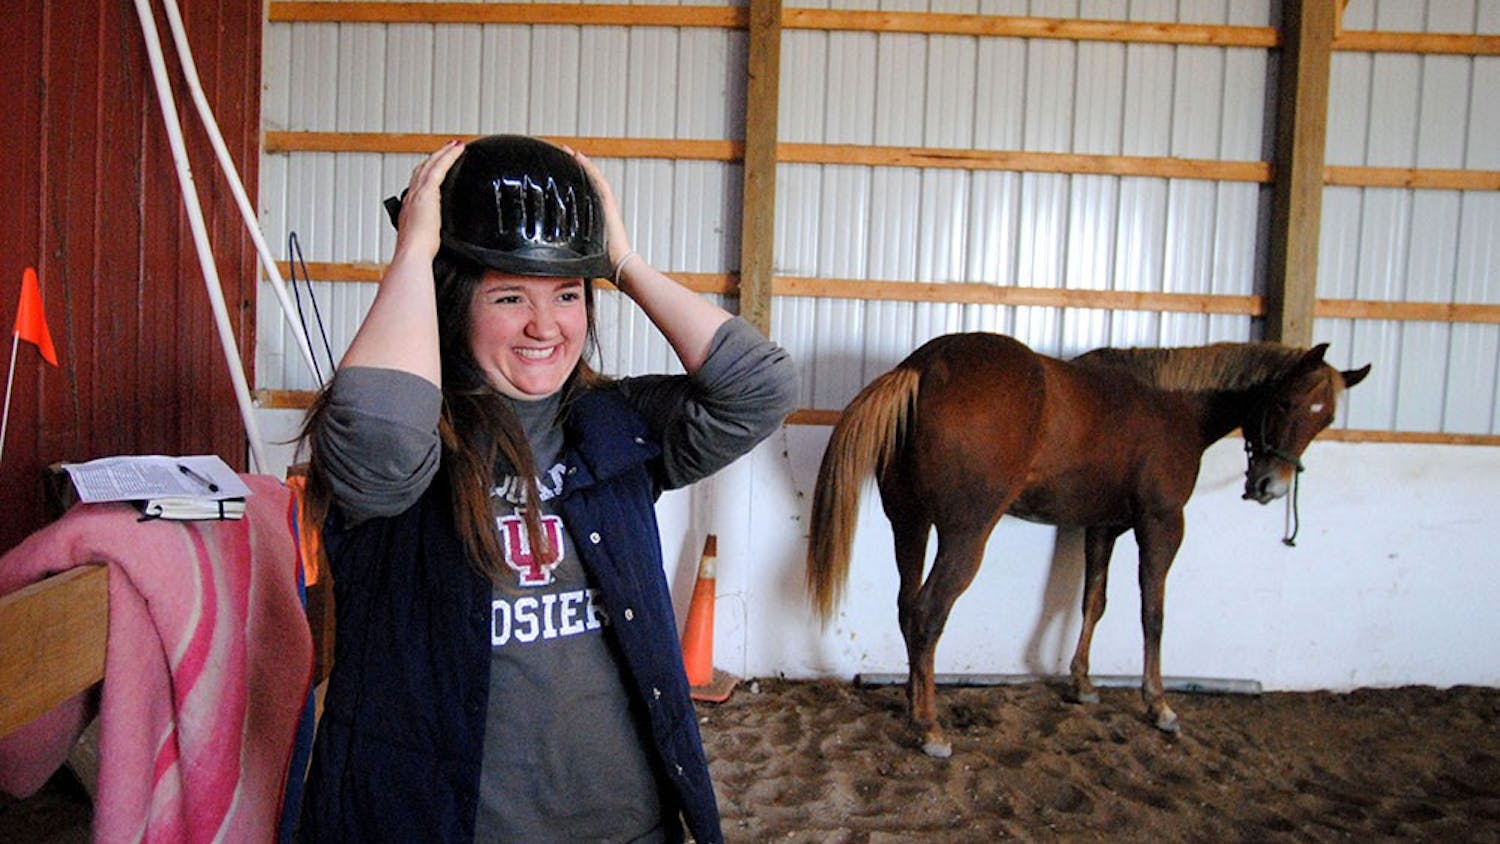 One Sunday afternoon in October, Emily prepares for her horseback riding lesson with Gracie (right) at the Majik Equine Rescue in Cloverdale, IN. Before reenrolling in classes this semester, she developed a self-care routine to stay focused on moving forward. 